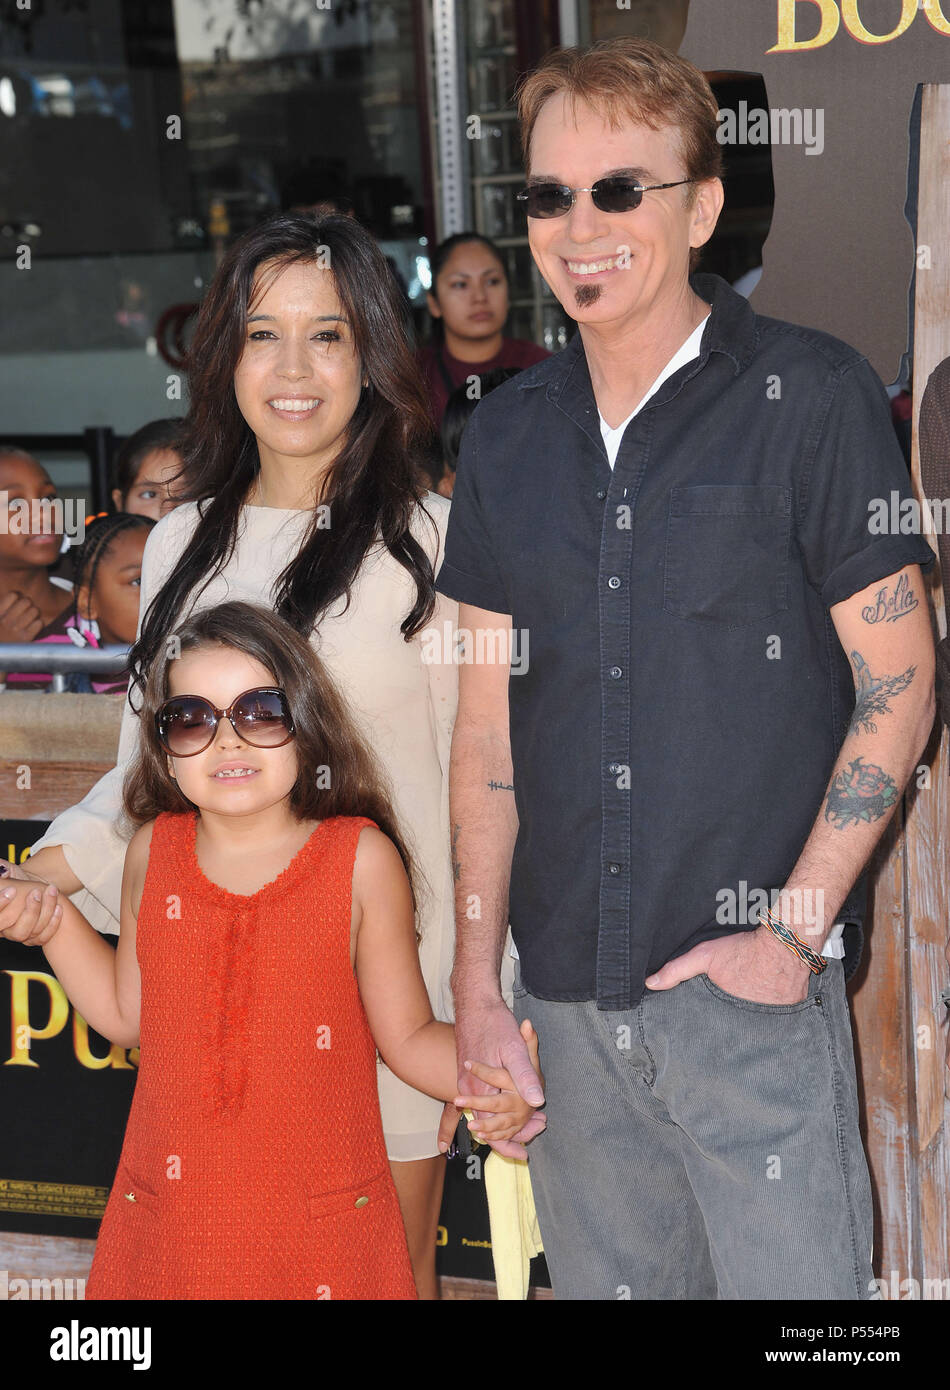 Billy bob thornton and wife hi-res stock photography and images - Alamy